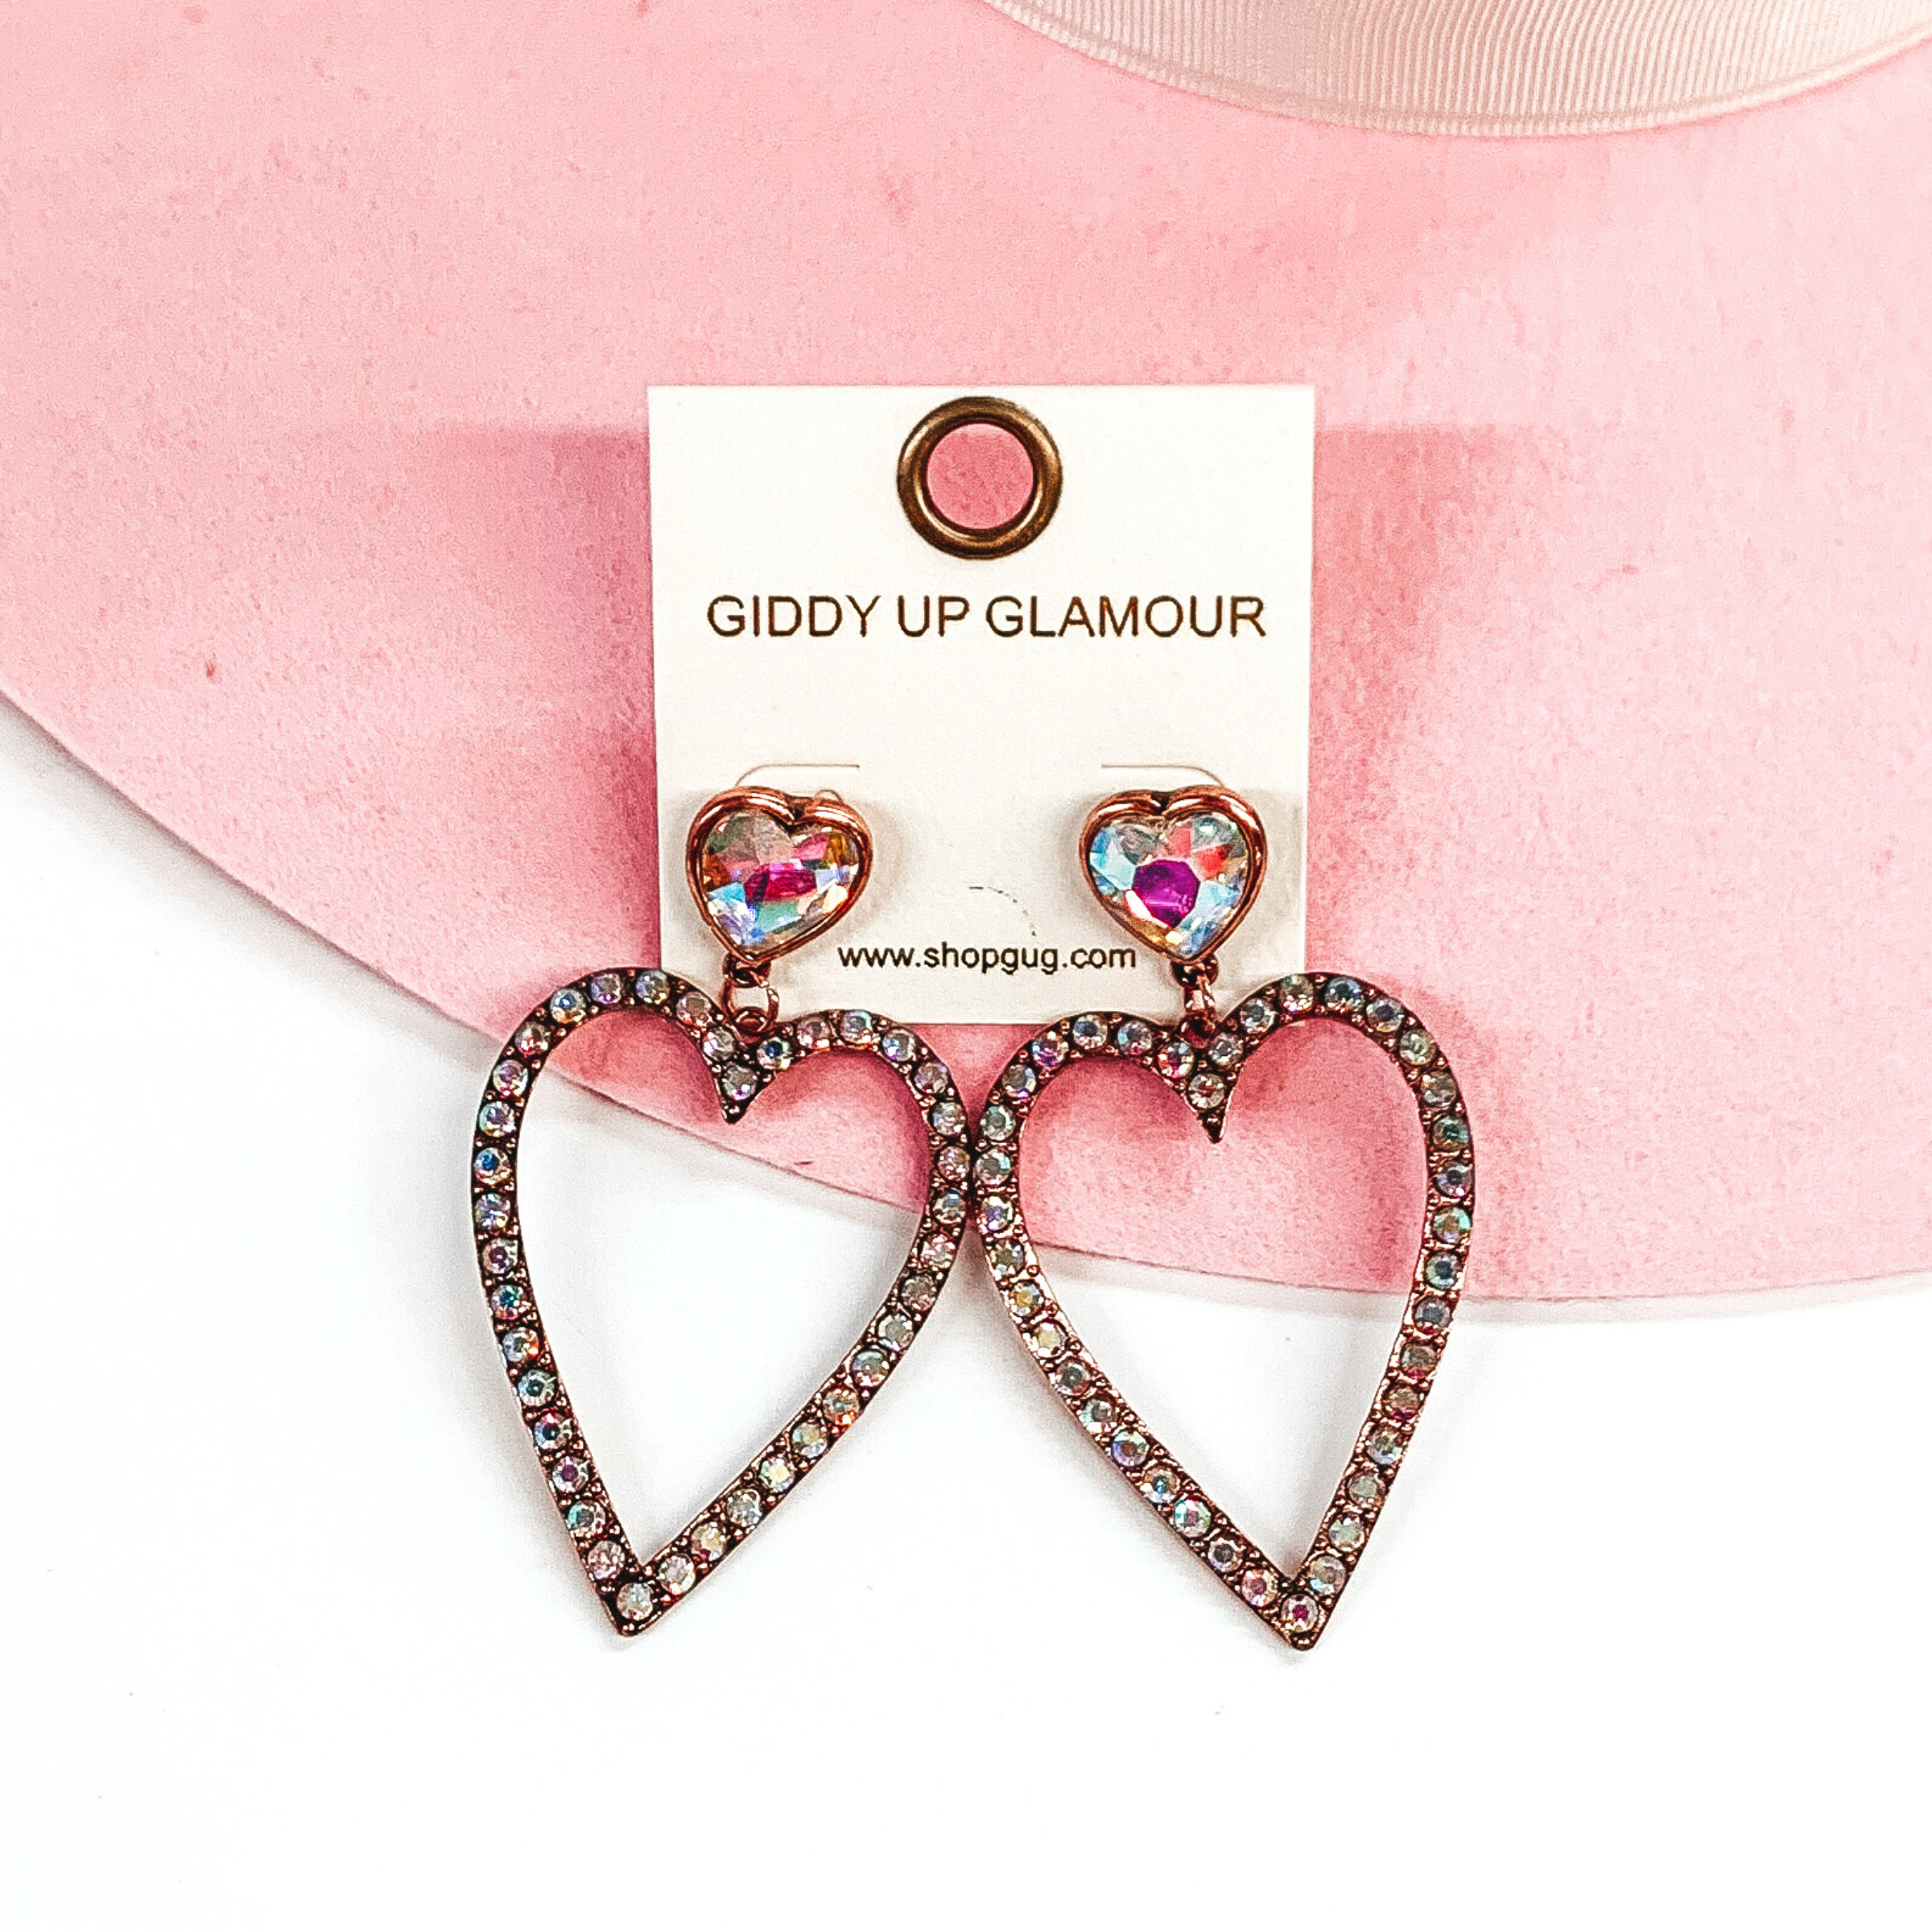 AB crystal heart shaped studs with a copper backing. The studs have a hanging heart outline pendant in copper with AB crystals. These earrings are pictured on a white and pink background. 